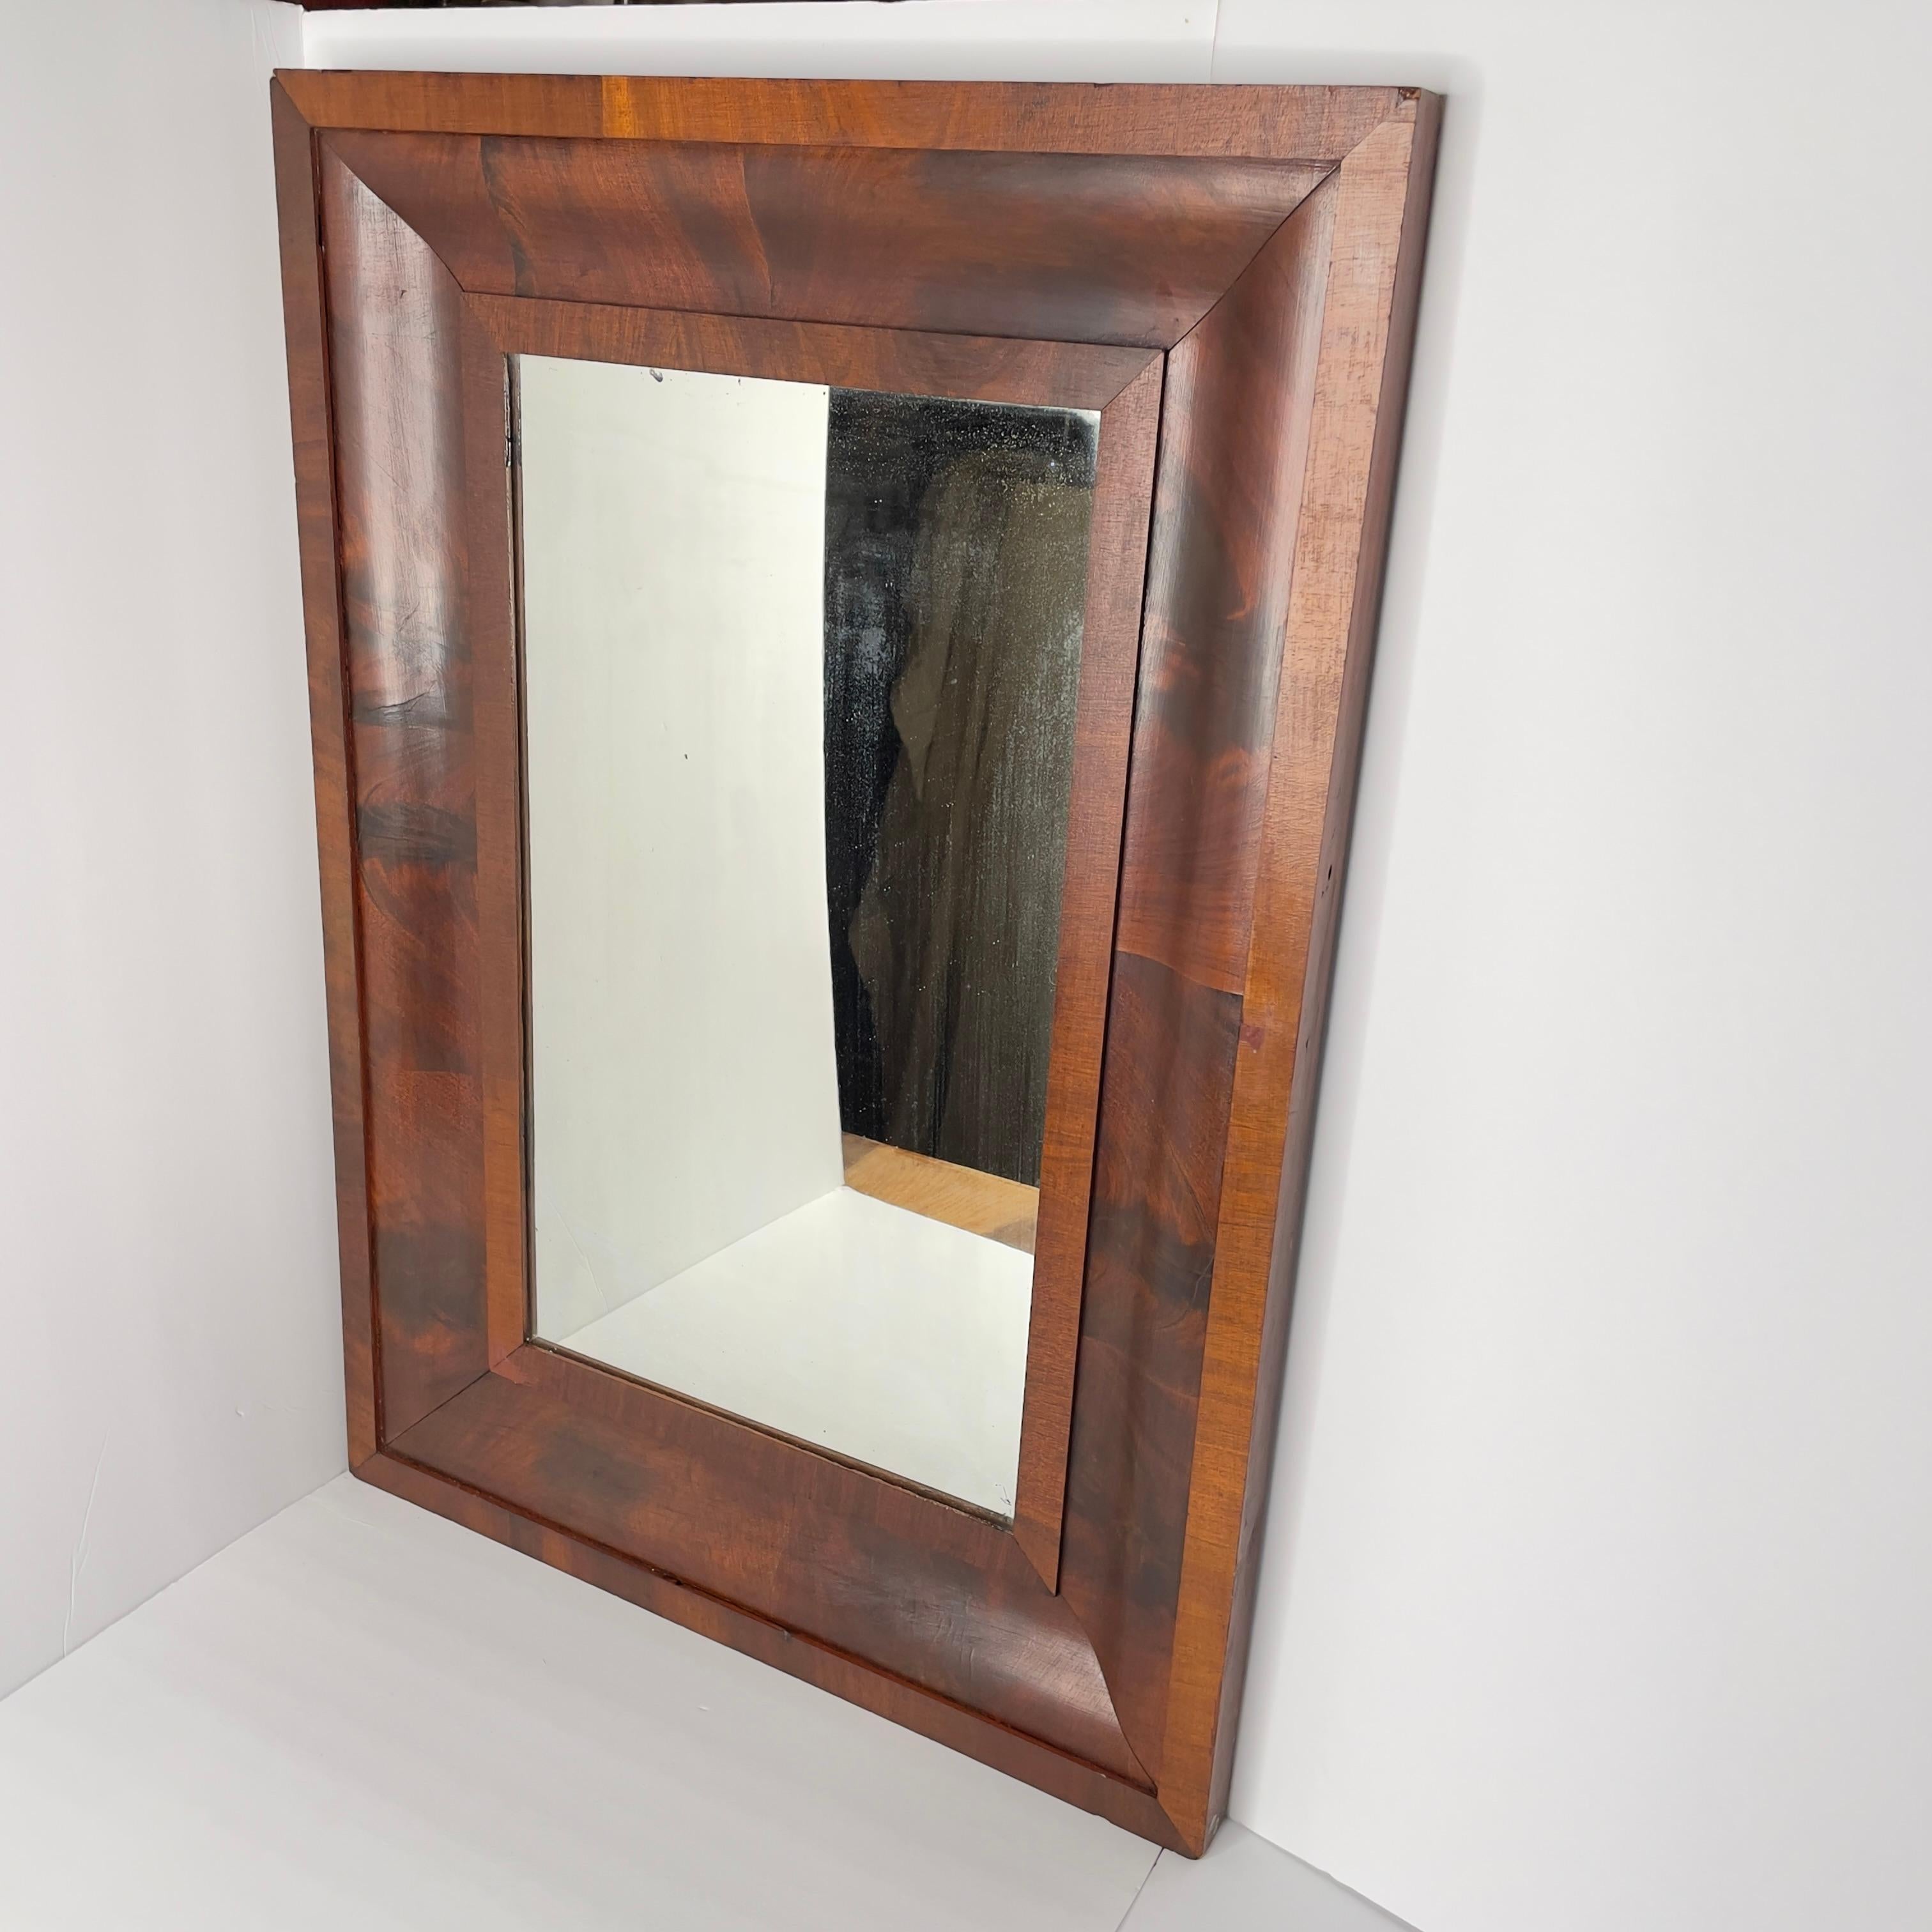 Antique 19th Century flame mahogany wall mirror with a solid wood backing. The mirror is wired to be hung on the wall, the wide ways. If you prefer the other direction, that can easily be accomplished with some new hardware and wire. 

The mirror